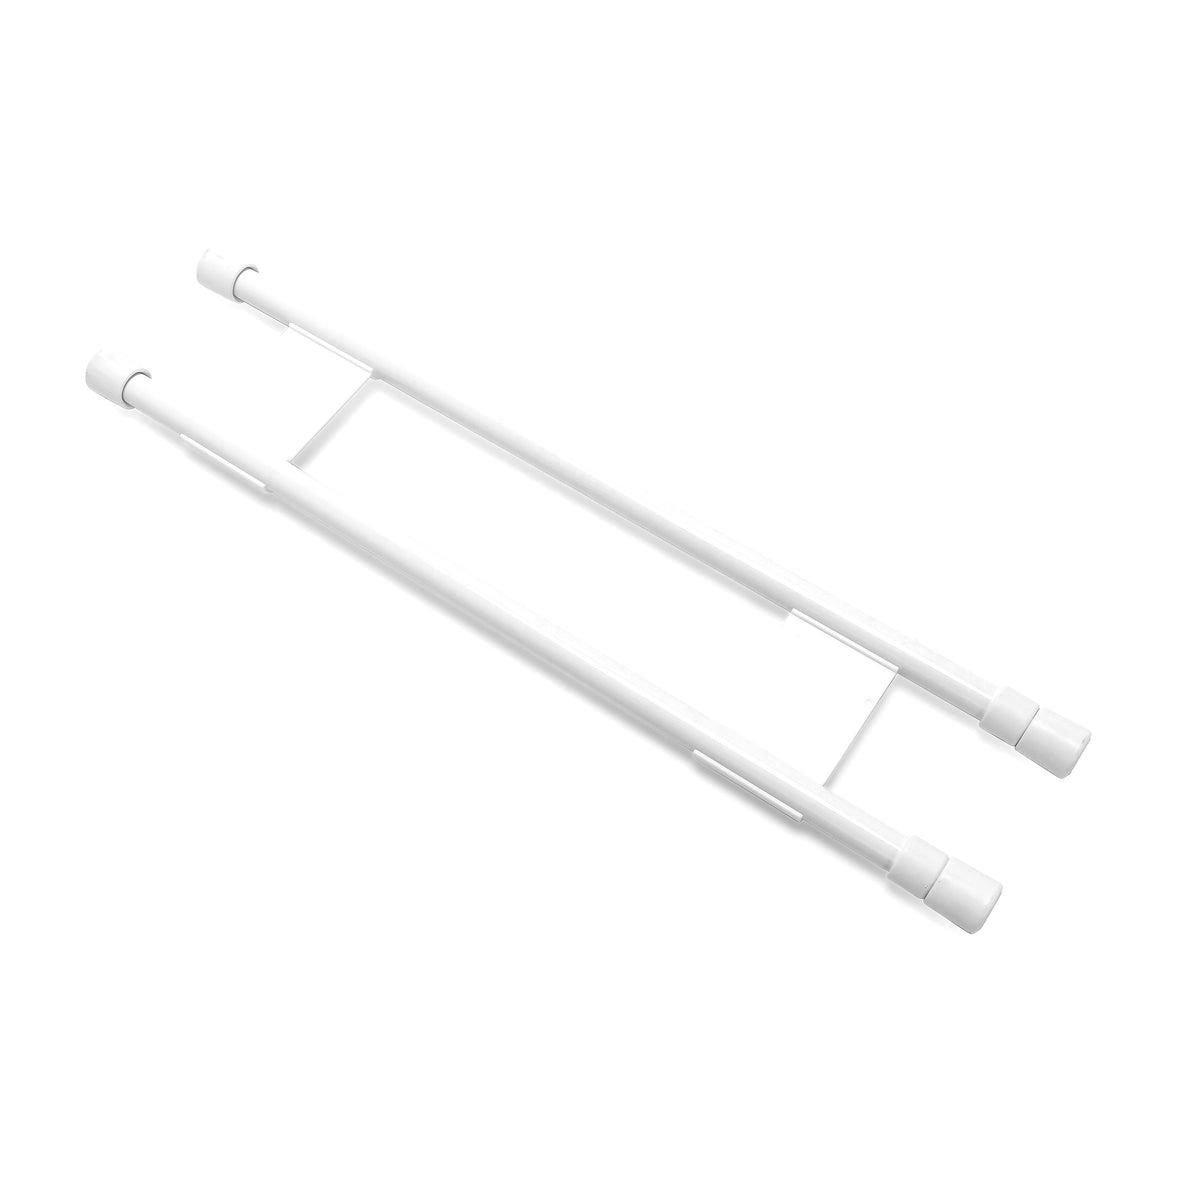 Camco 44063 Cupboard Bars - Double Bar, 1 Pack, White